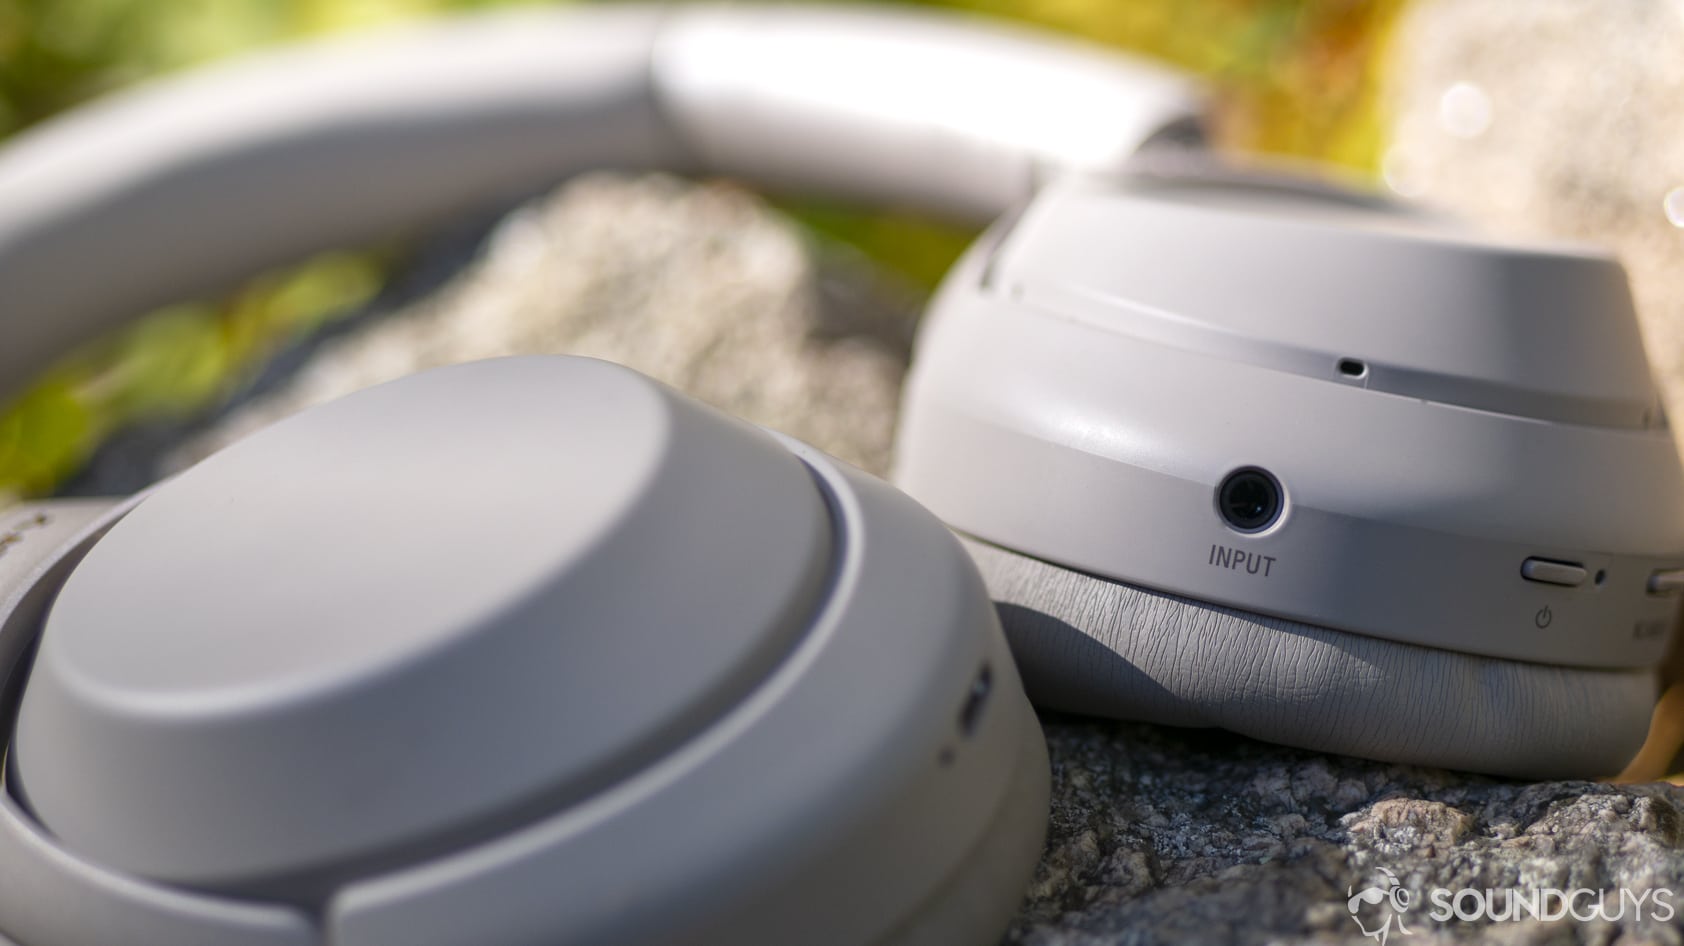 A picture of the Sony wh-1000x-m3 headphones.